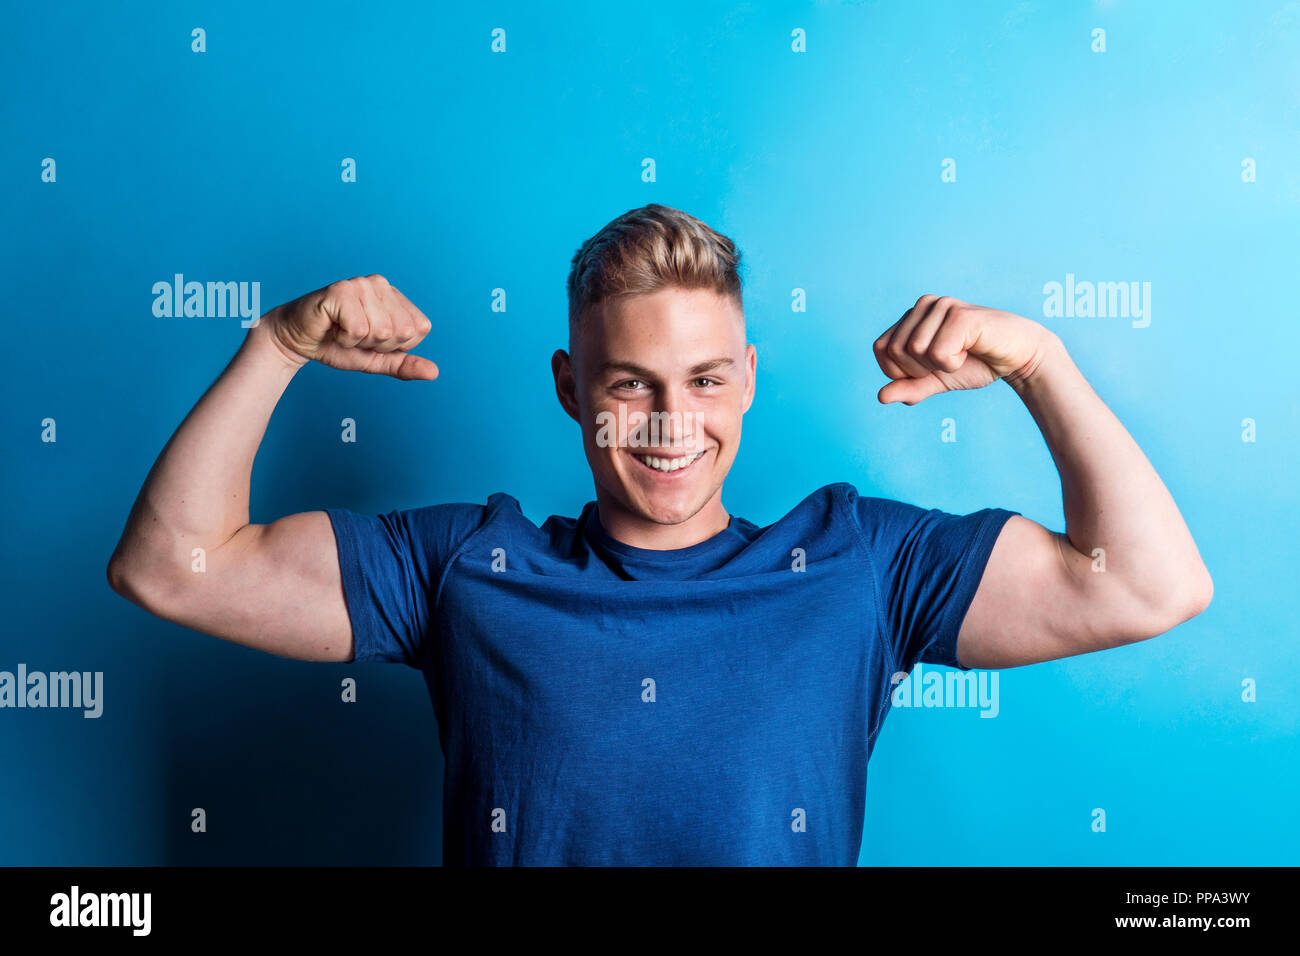 Portrait of a cheerful young man in a studio, flexing muscles. Stock Photo